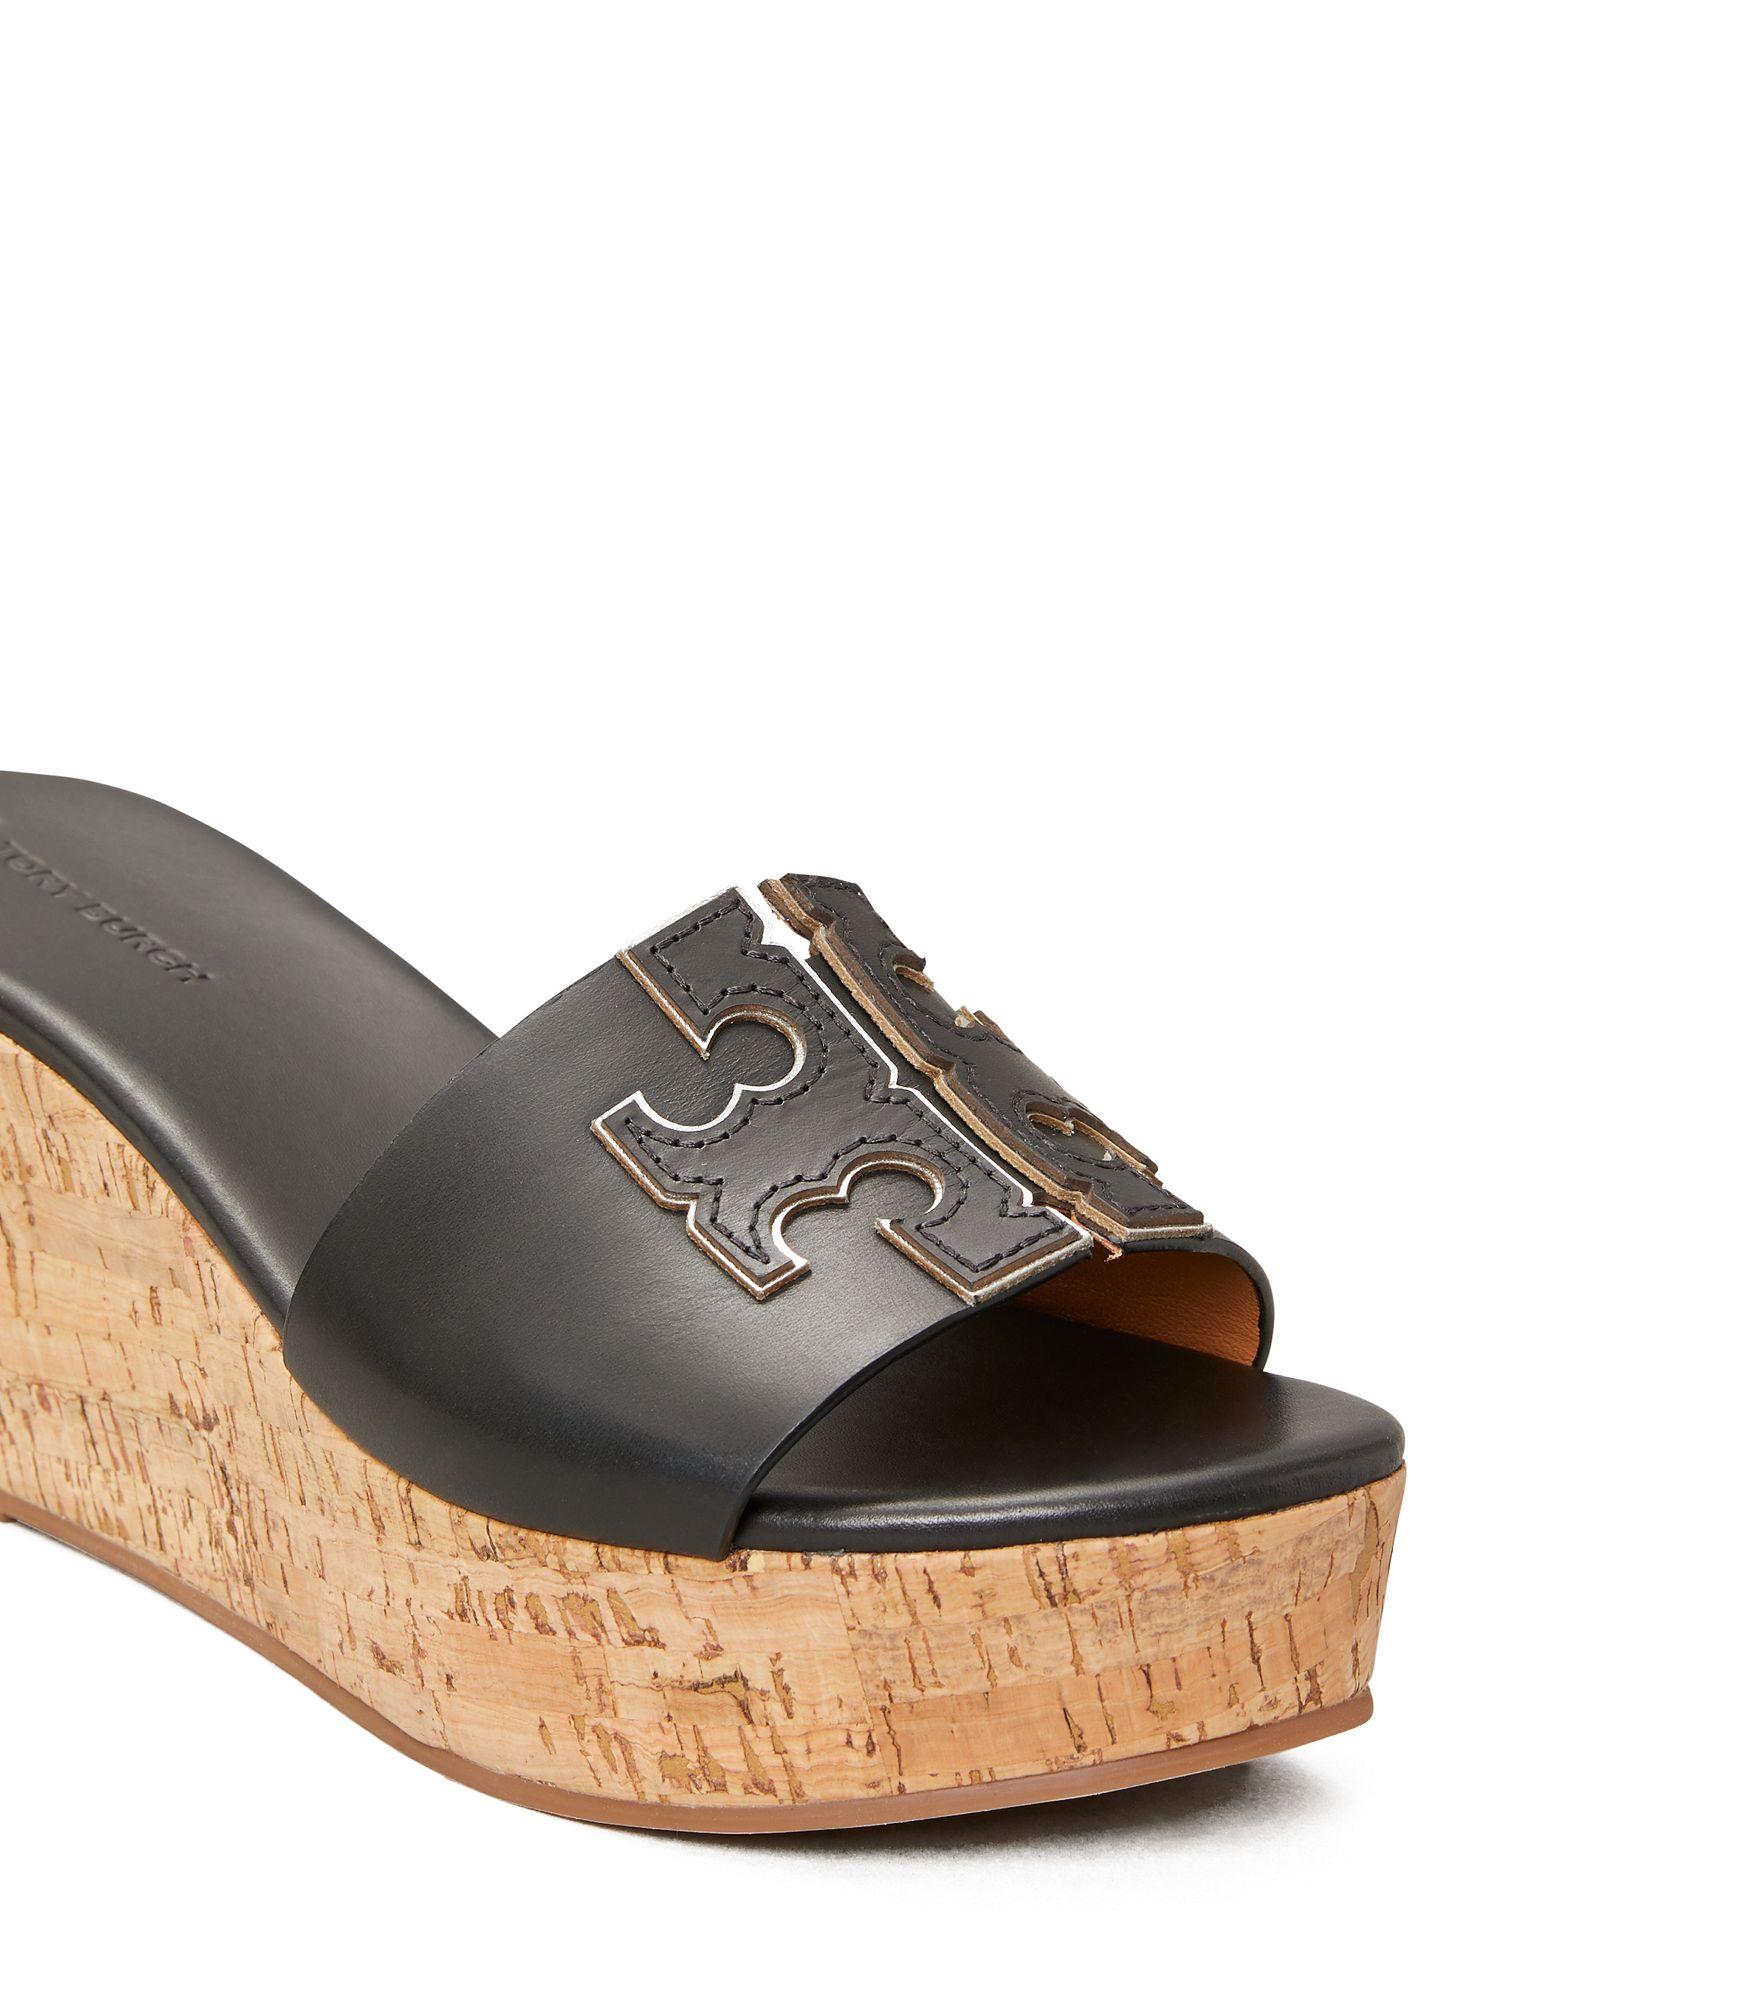 tory burch ines wedge, great selling Hit A 83% Discount - research.sjp ...